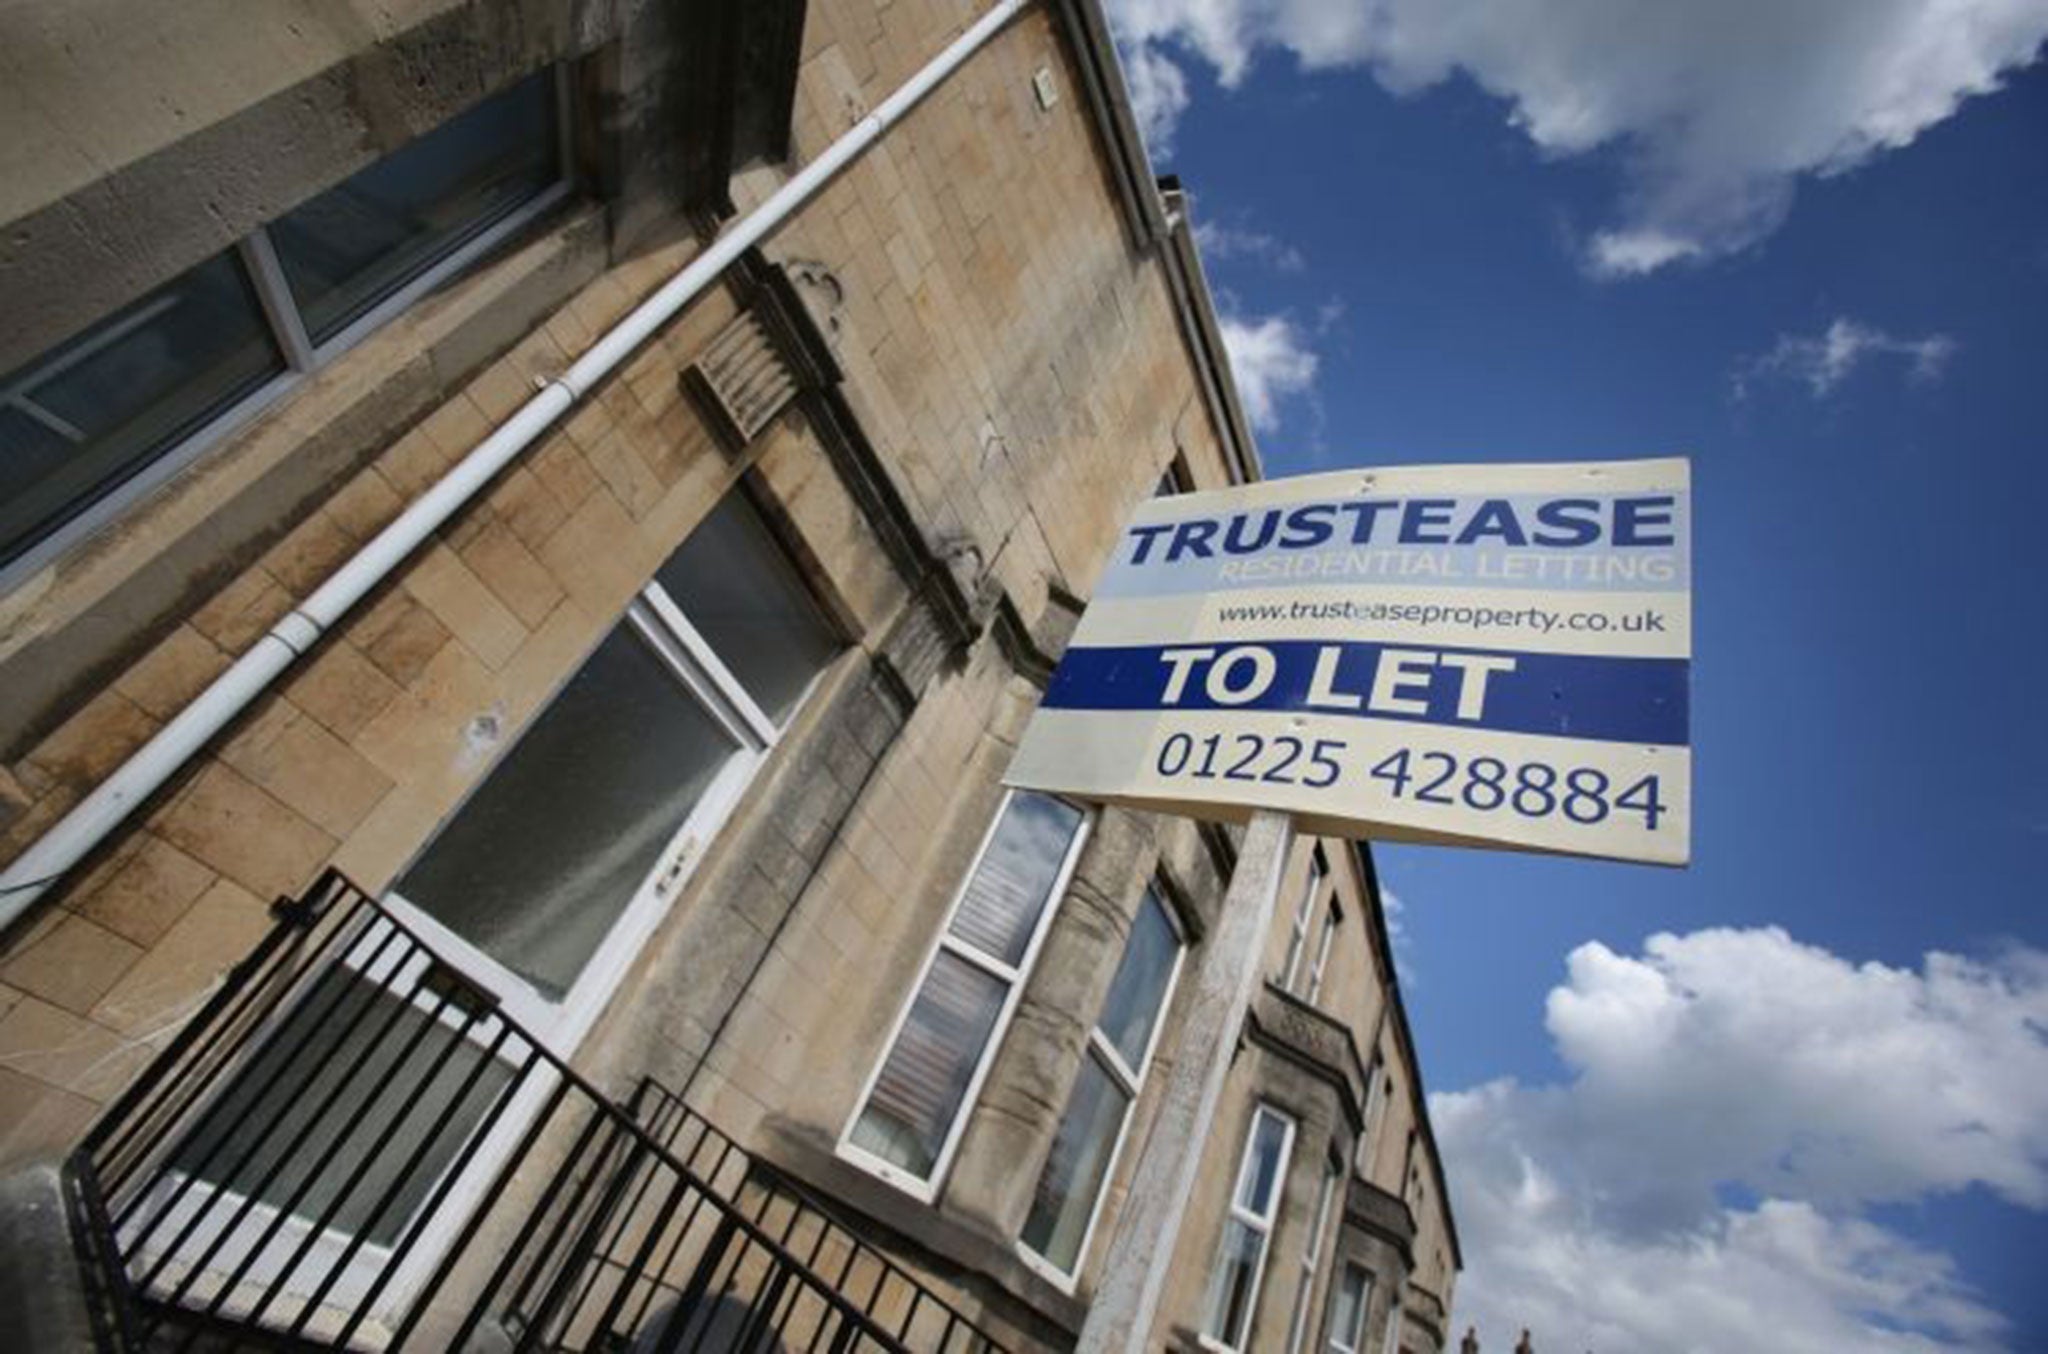 Ordinary homebuyers have been forced to move ahead of the deadline because of landlords in the chain